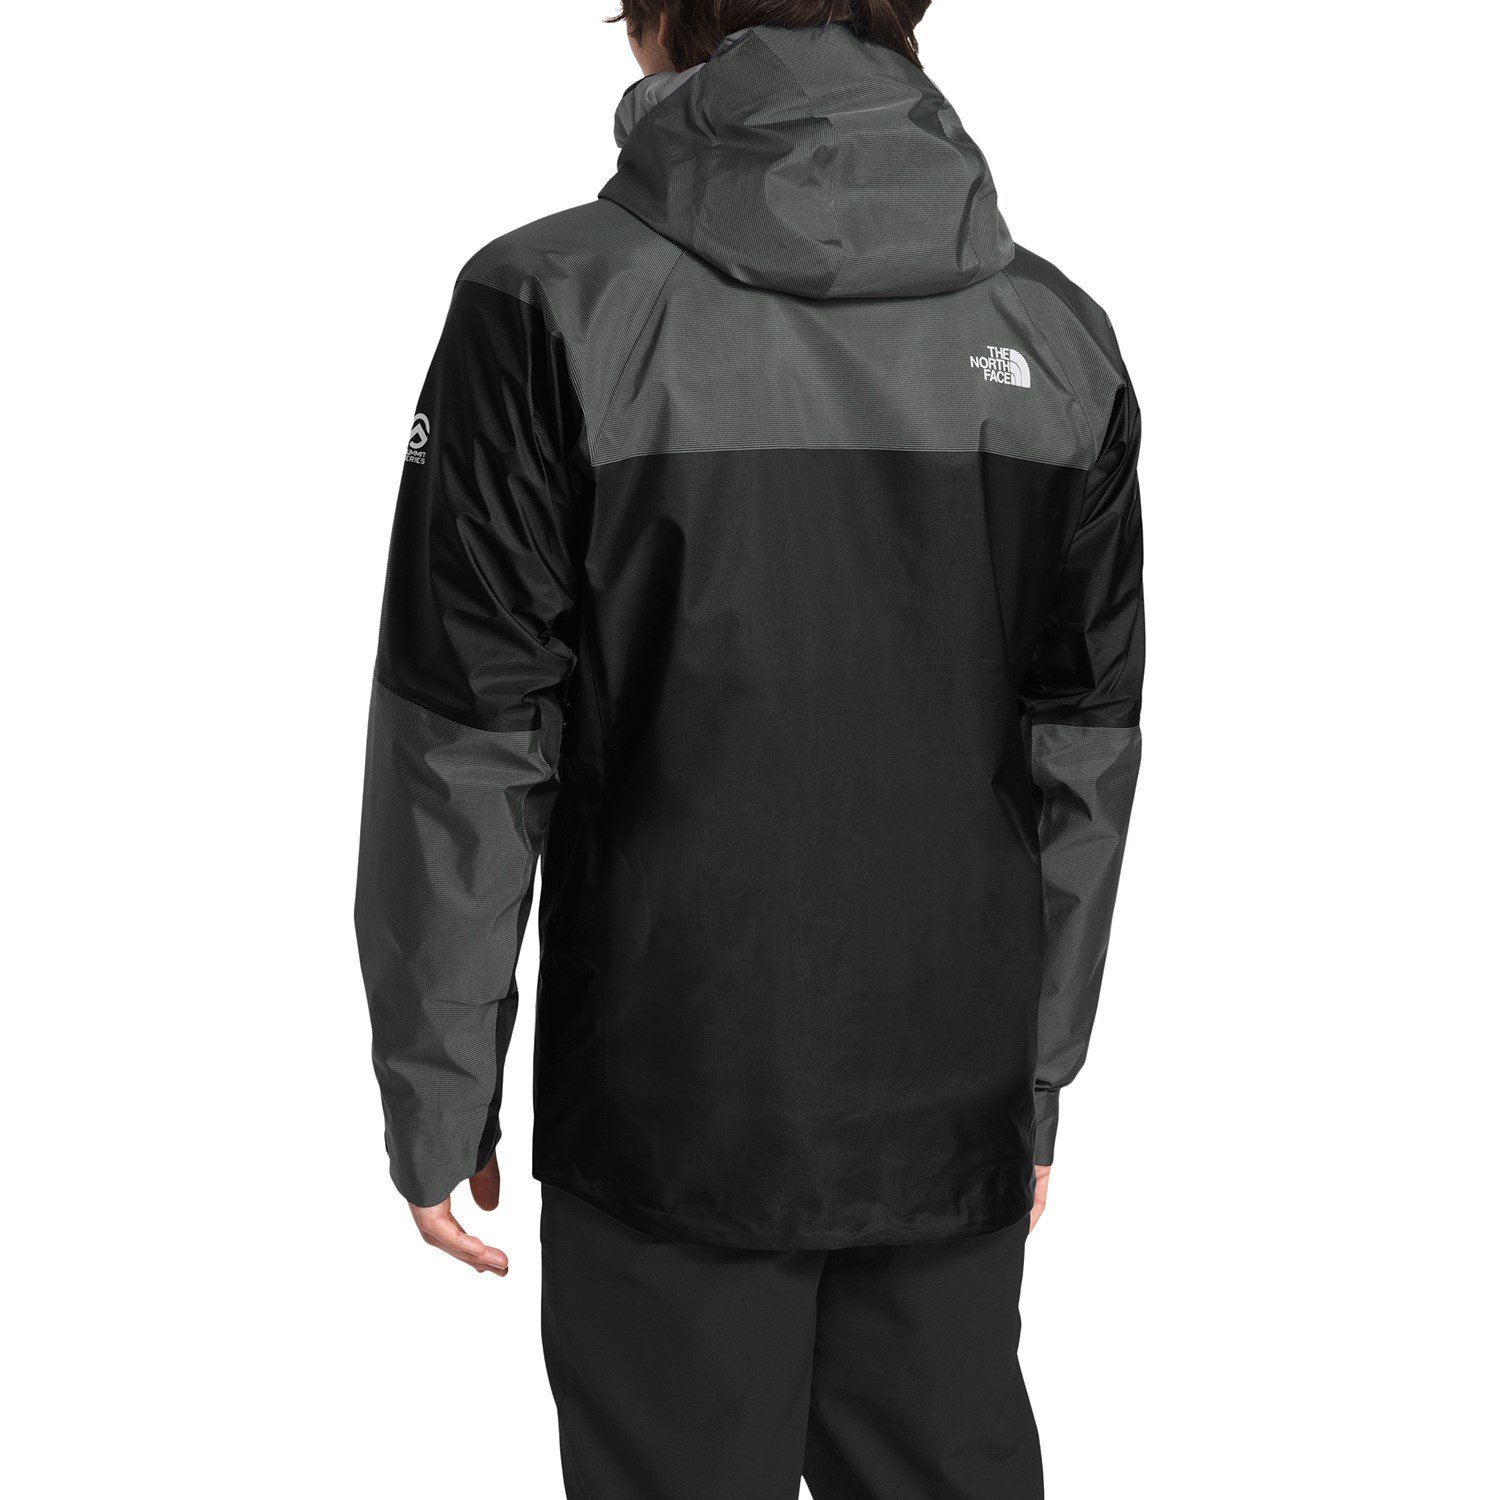 New With Tags! The North Face Fuse Jacket Summit Series HyVent 2.5